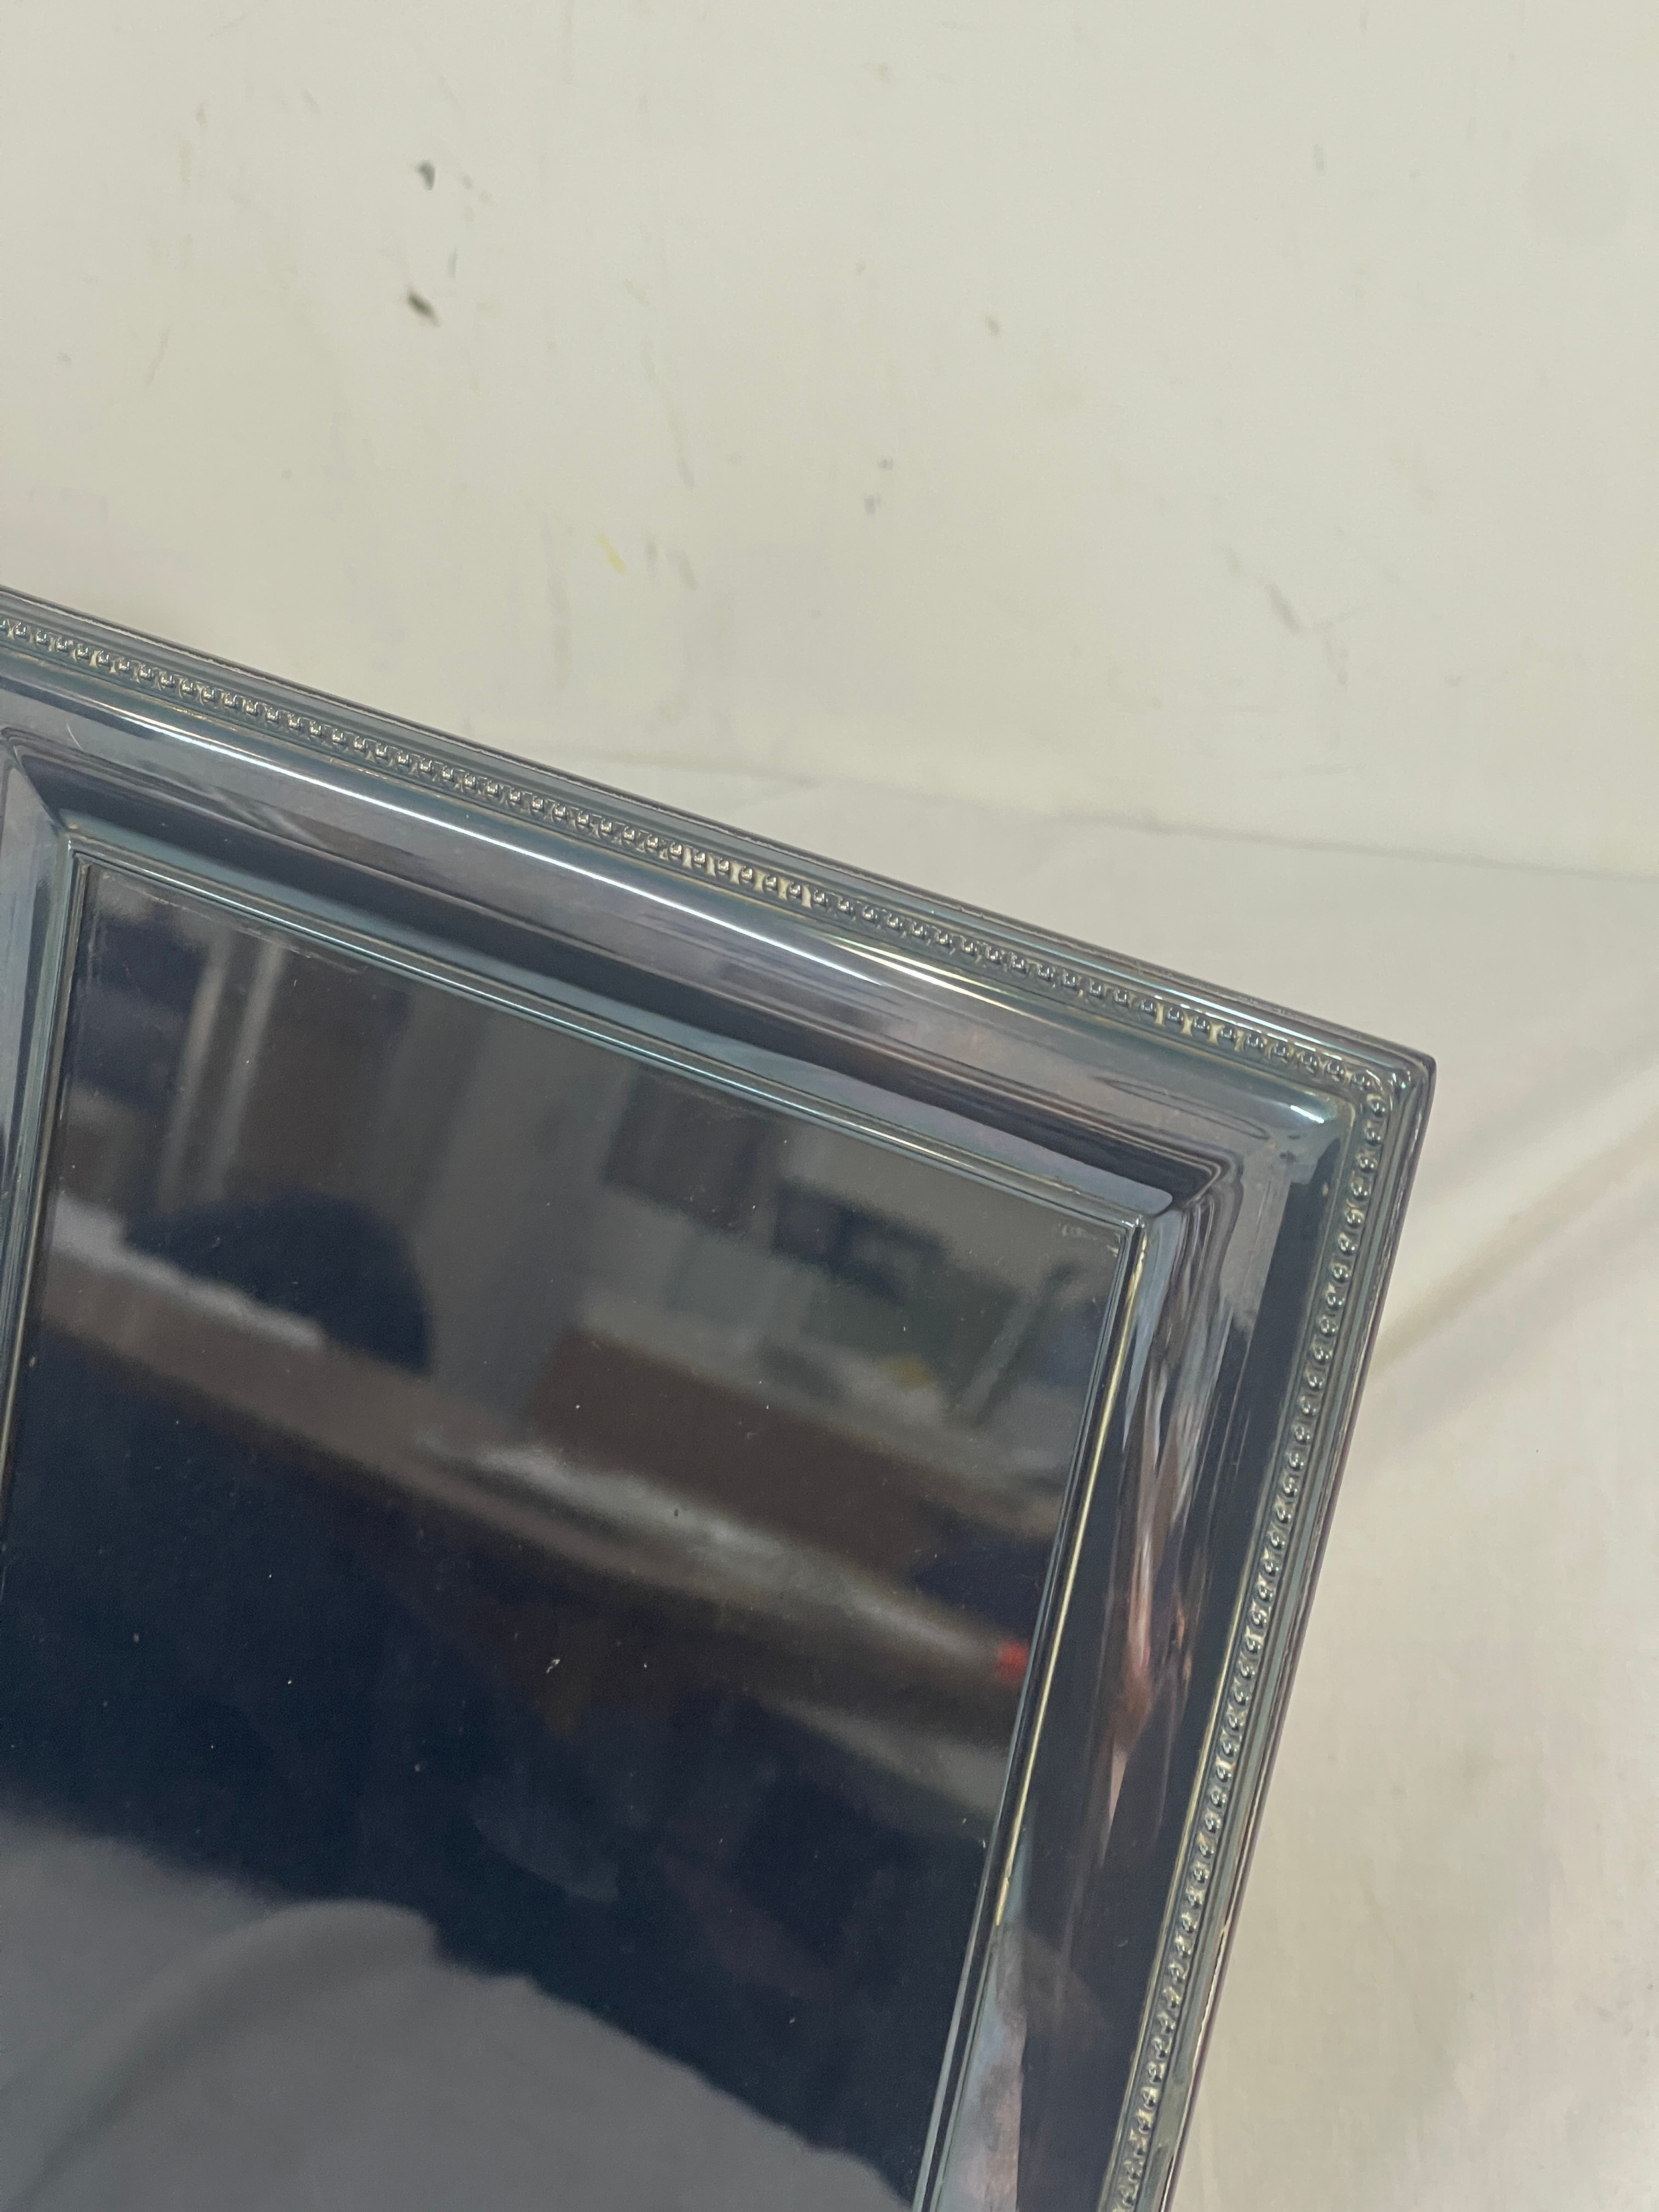 Pair of Carrs Silver plated photo frames, photo size 20 x 15cm - Image 2 of 4